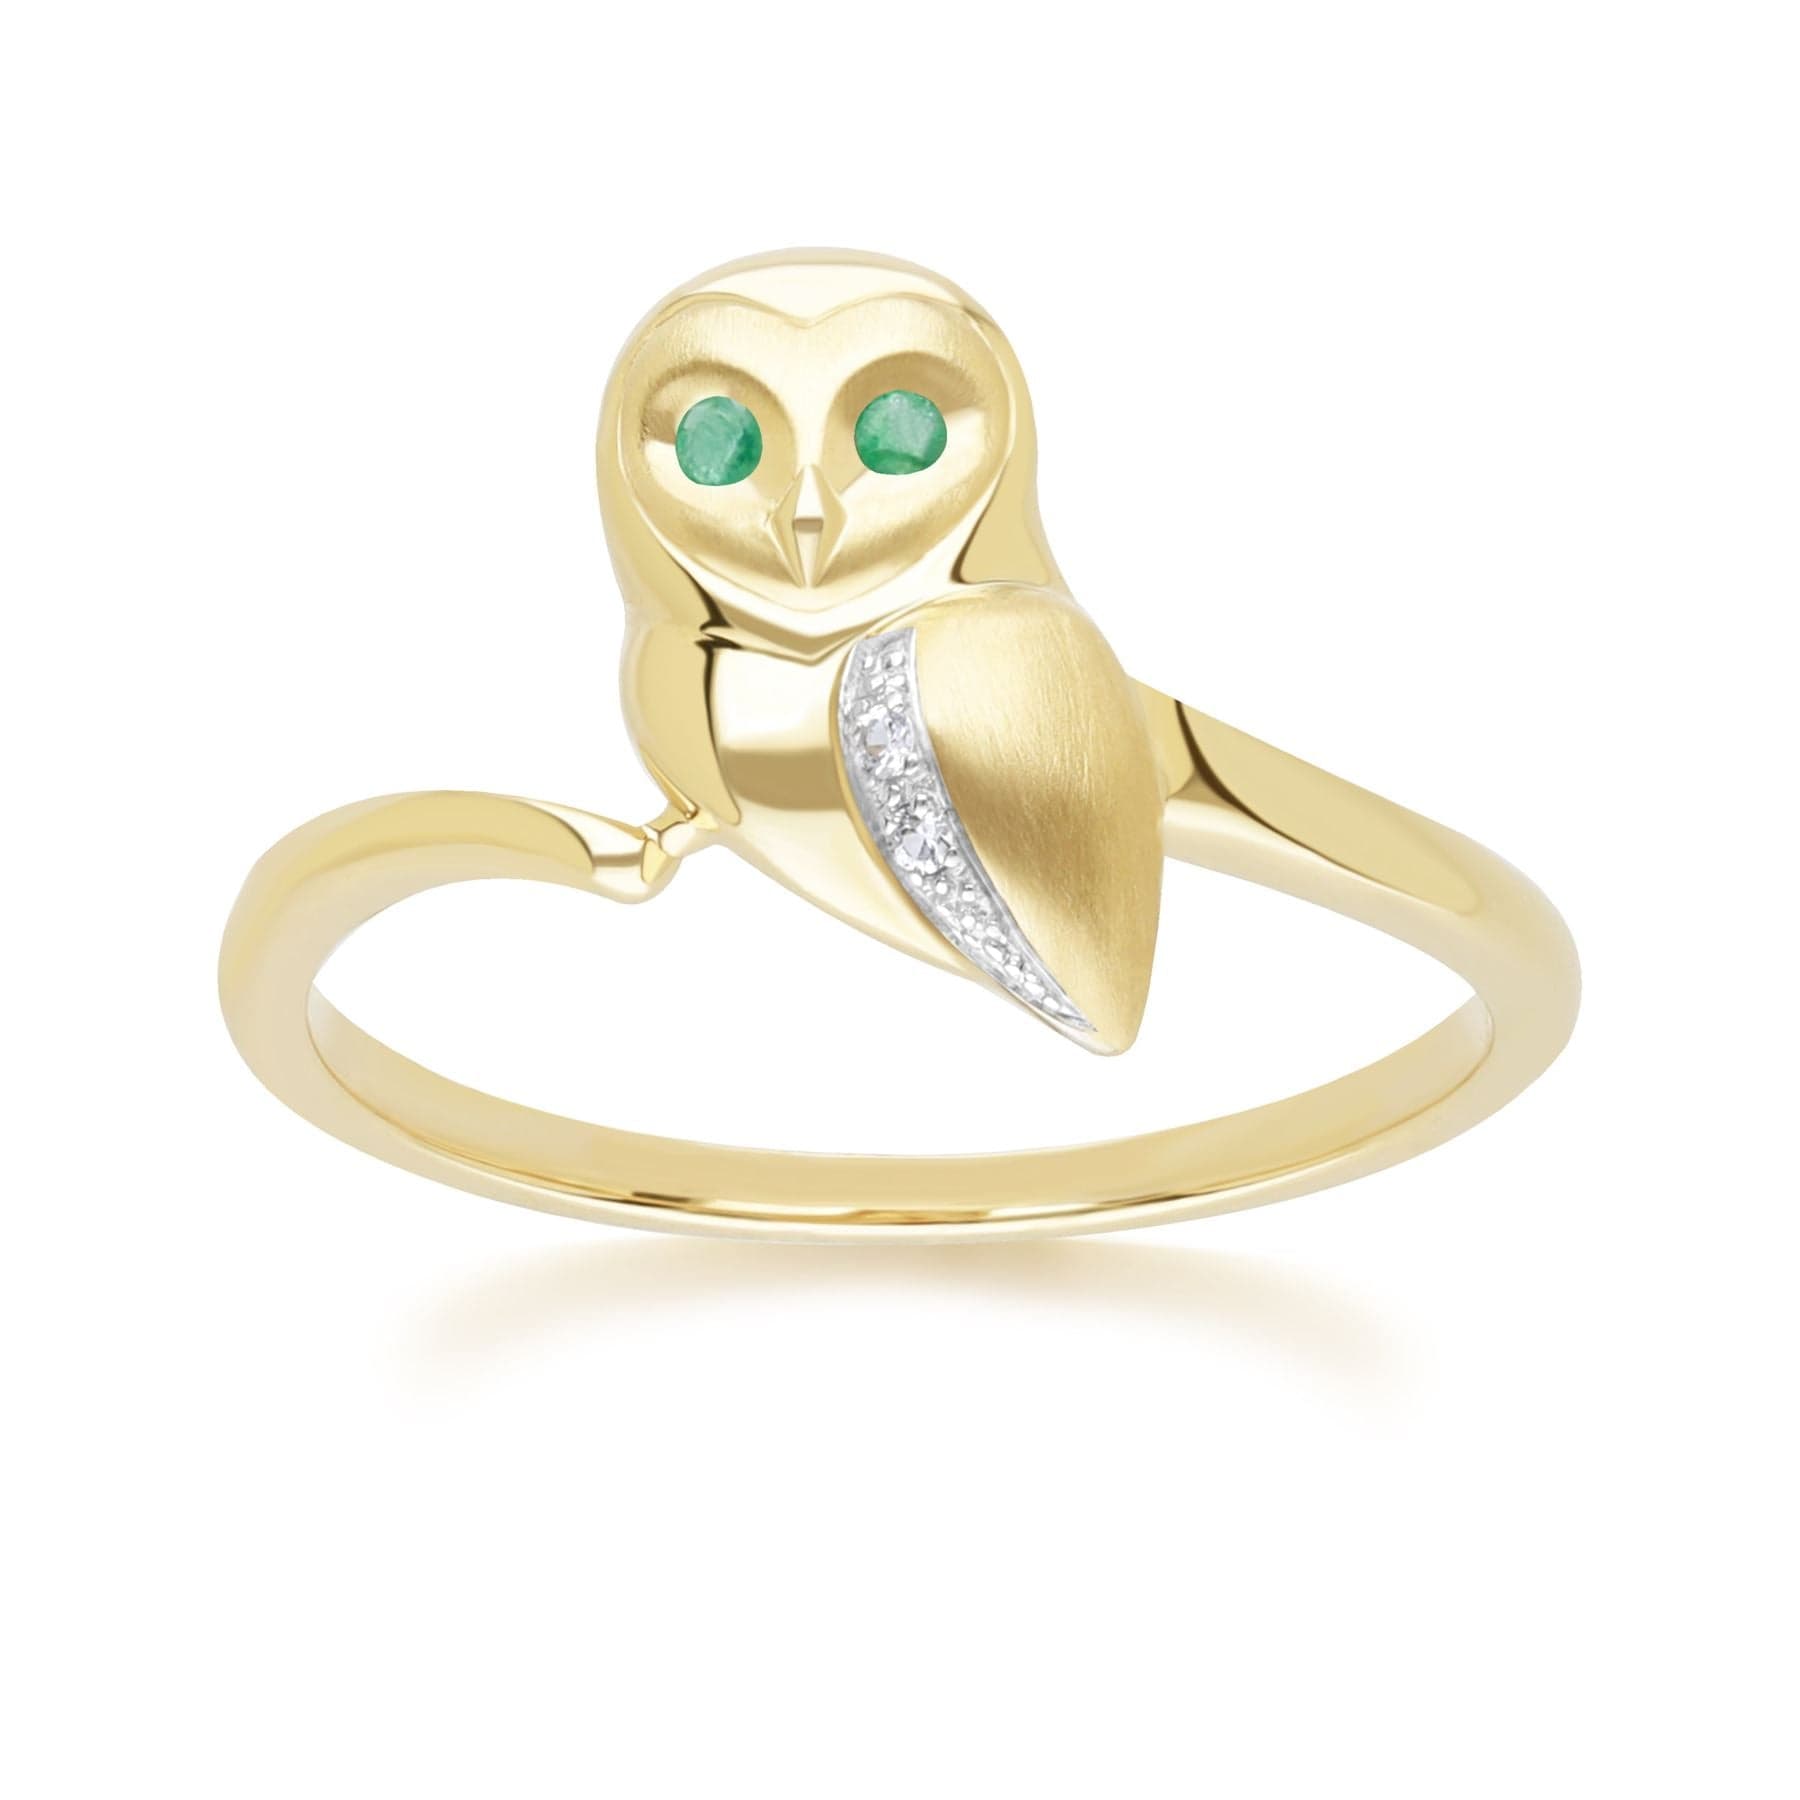 135R2103029 Gardenia Emerald and White Sapphire Owl Ring in 9ct Yellow Gold Front